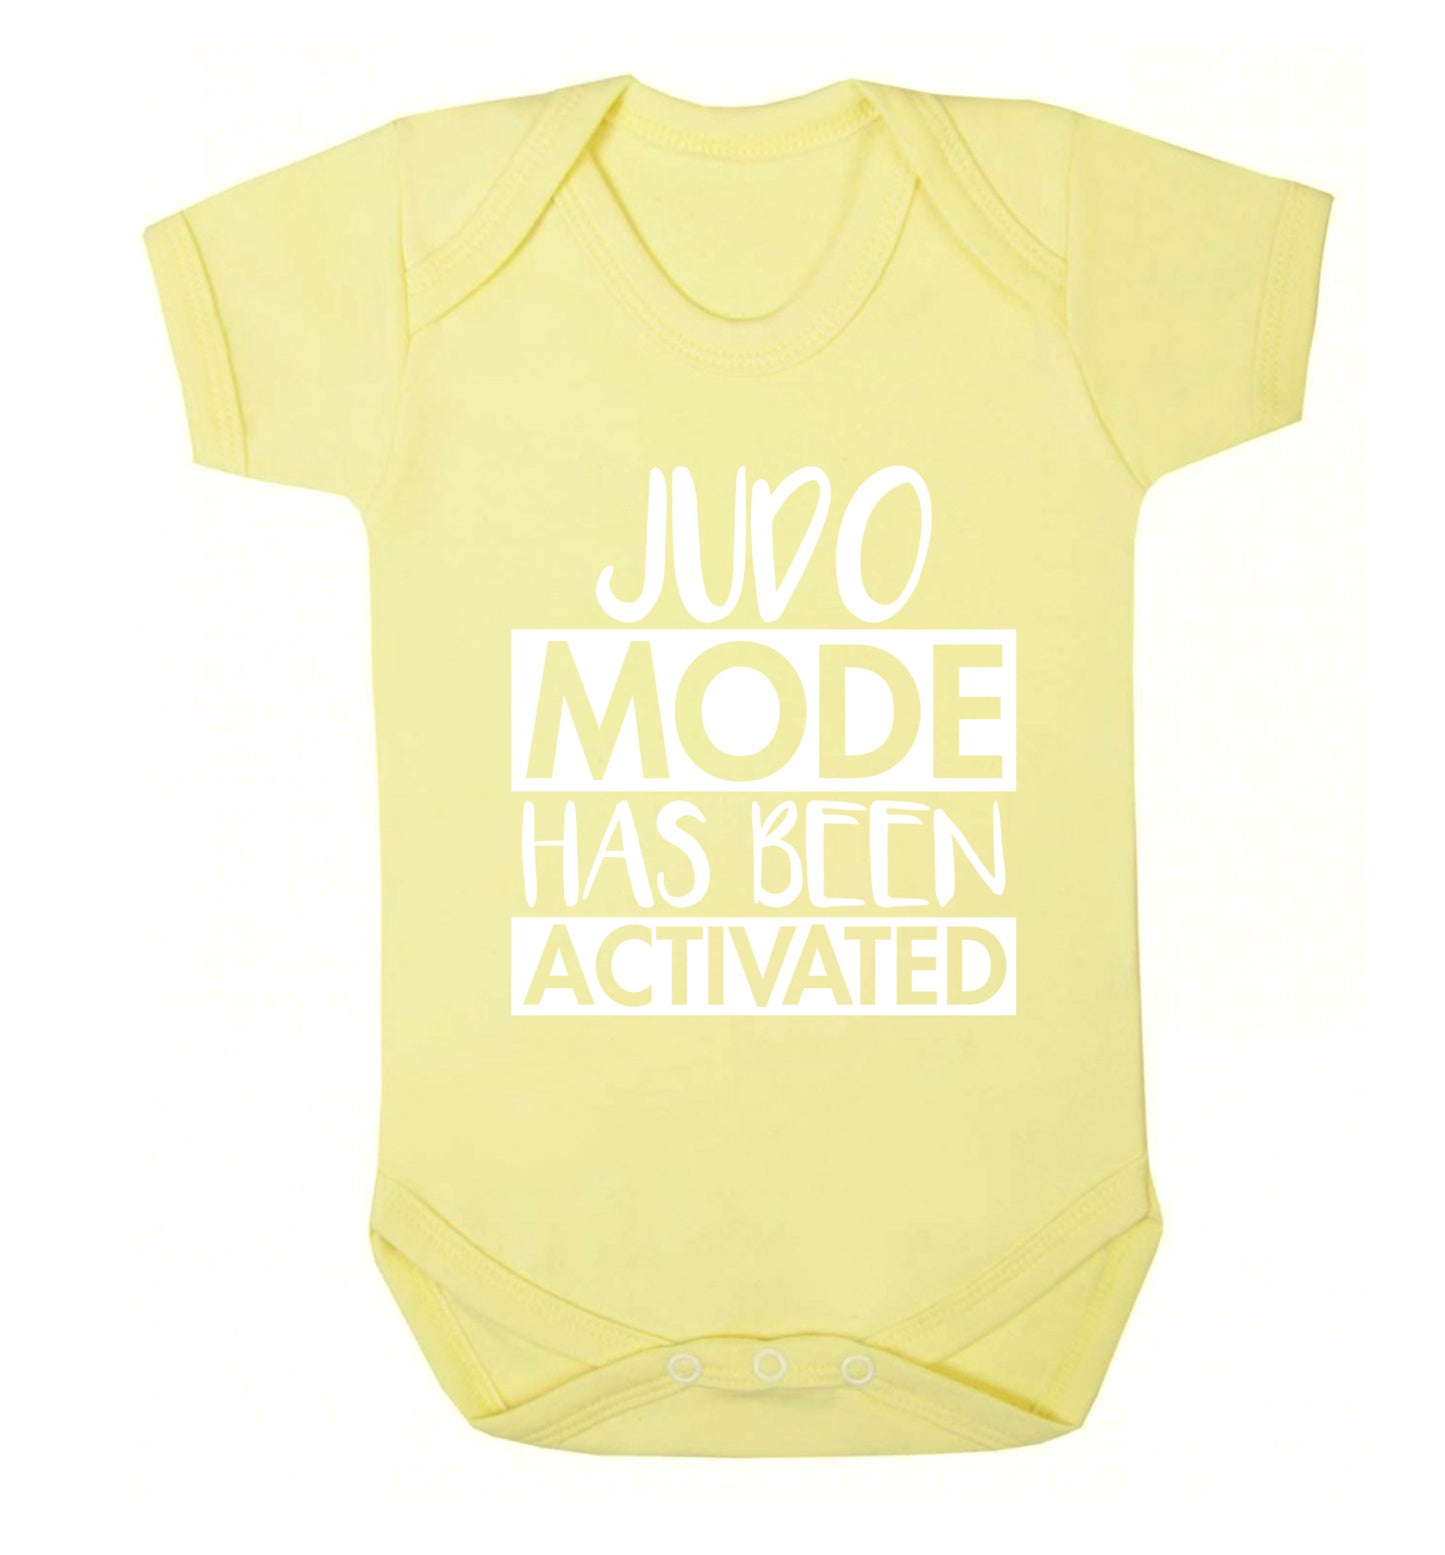 Judo mode activated Baby Vest pale yellow 18-24 months